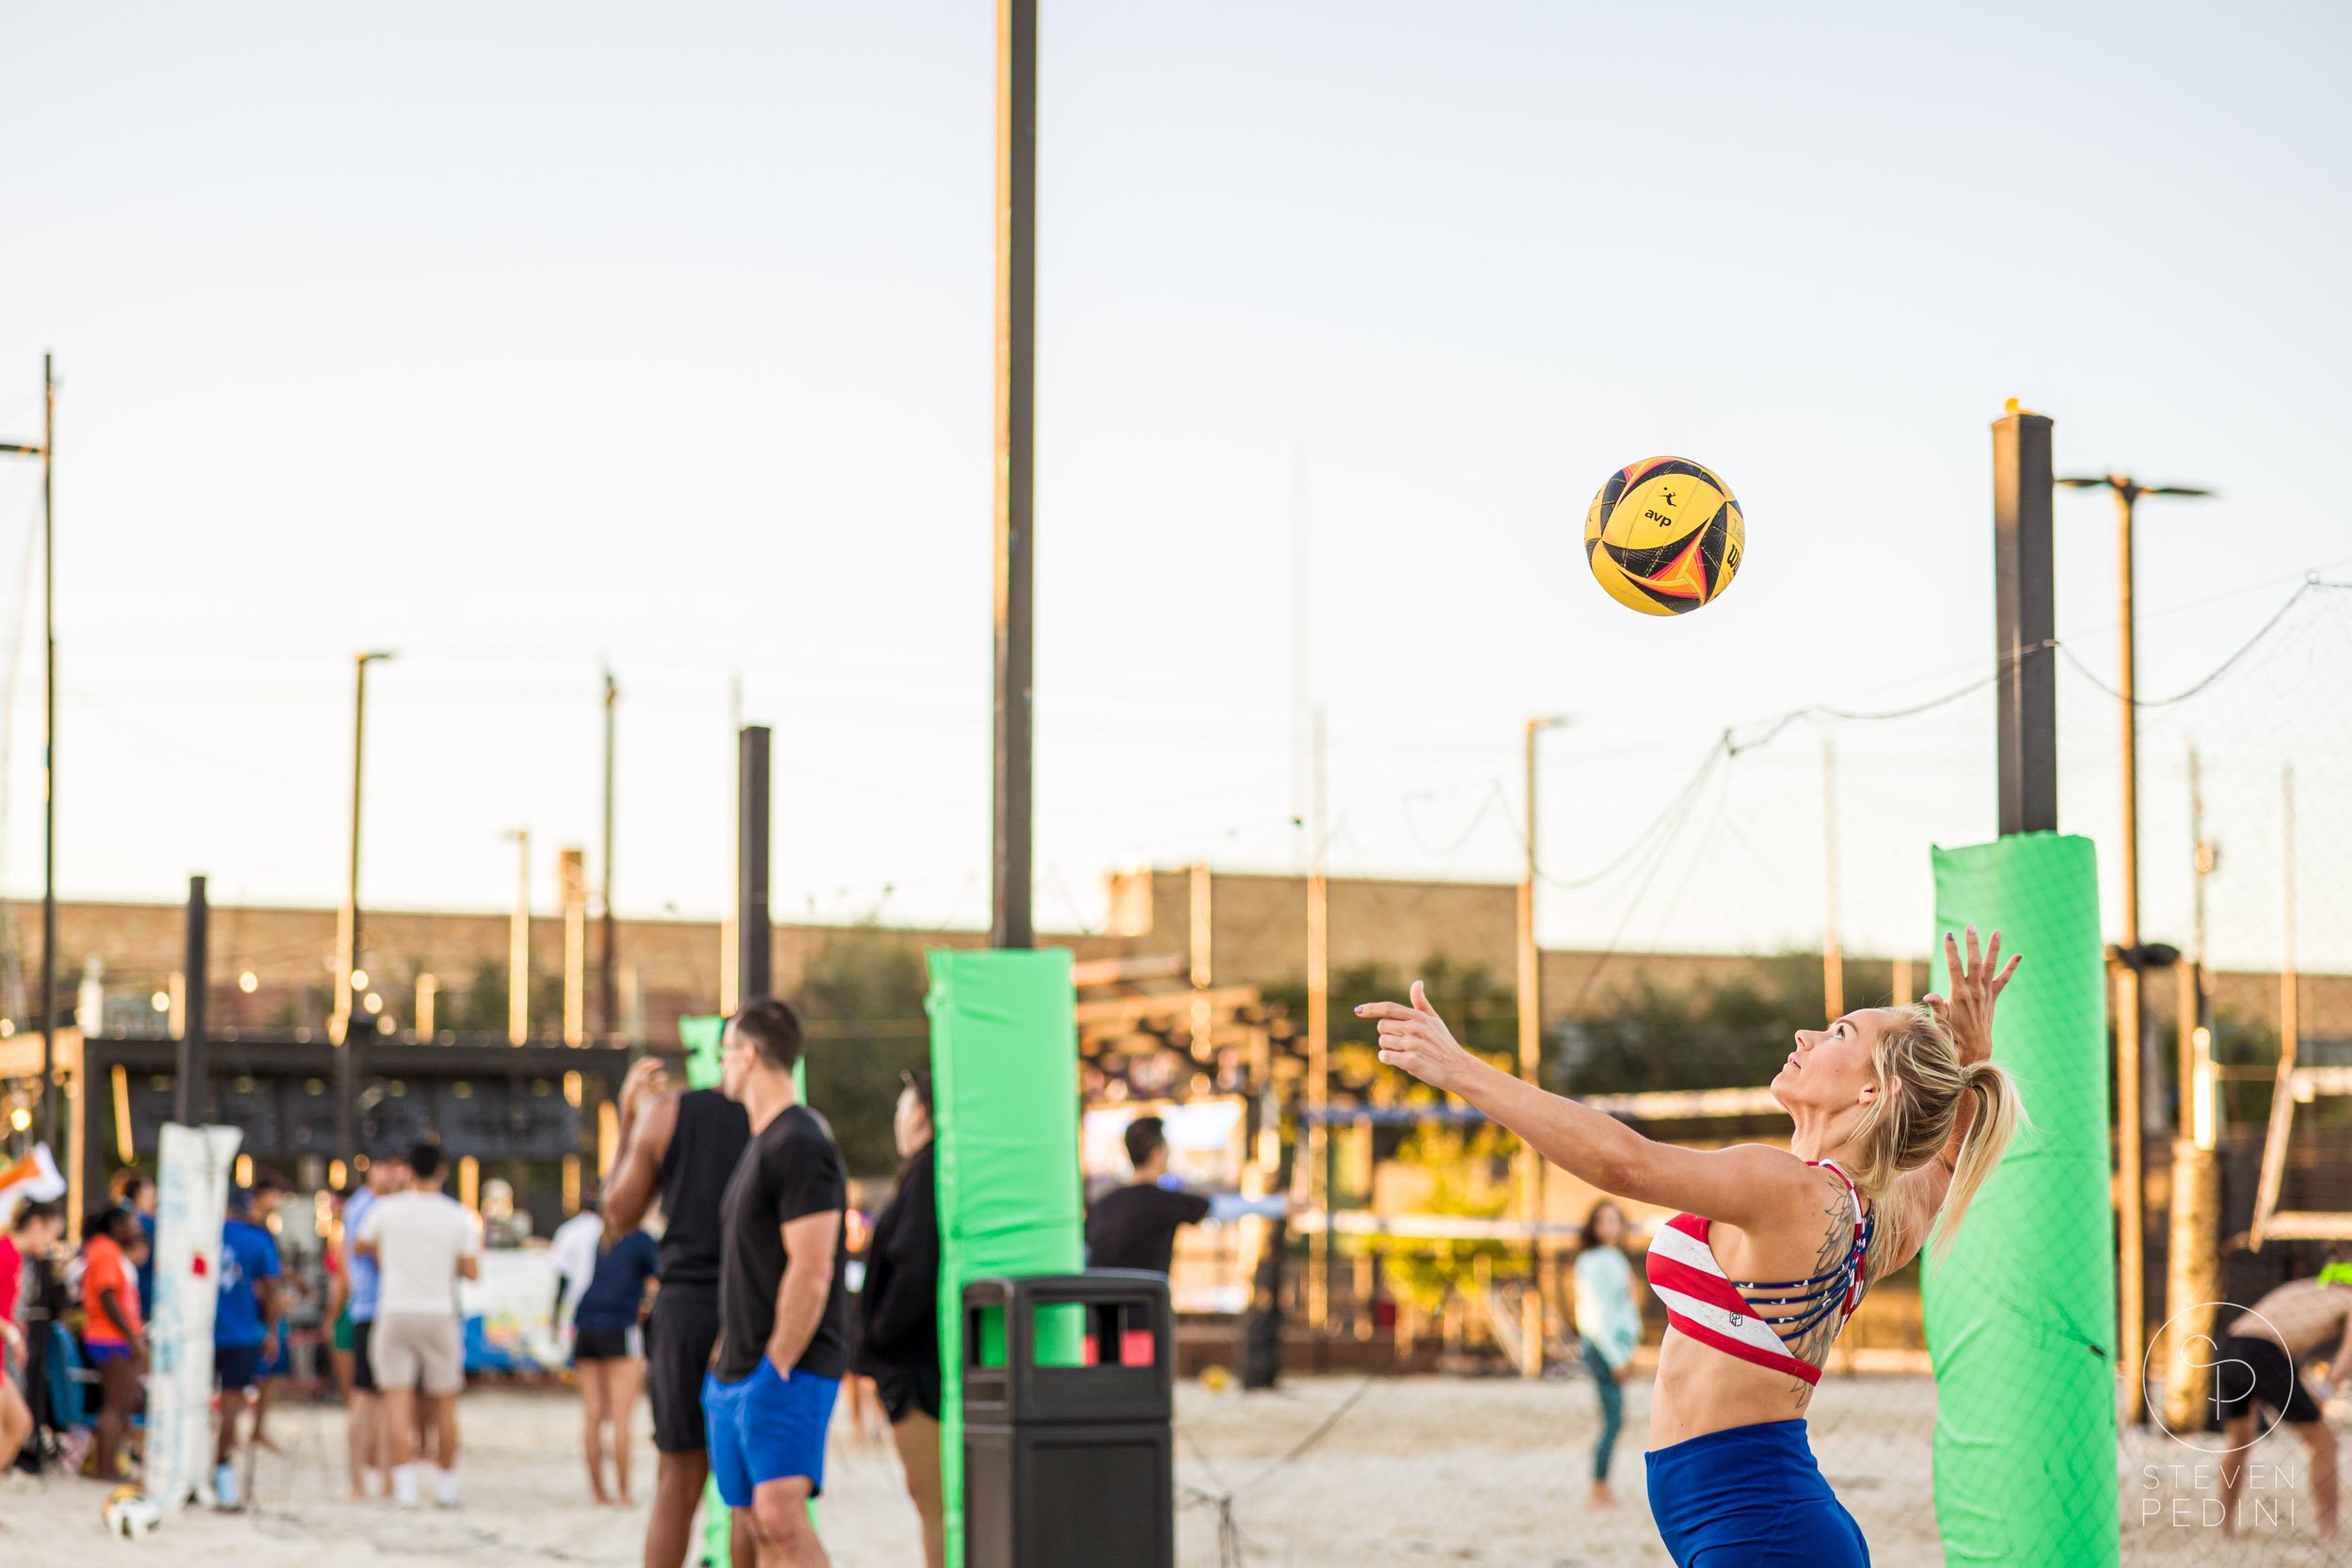 Steven Pedini Photography - Bumpy Pickle - Sand Volleyball - Houston TX - World Cup of Volleyball - 00191.jpg